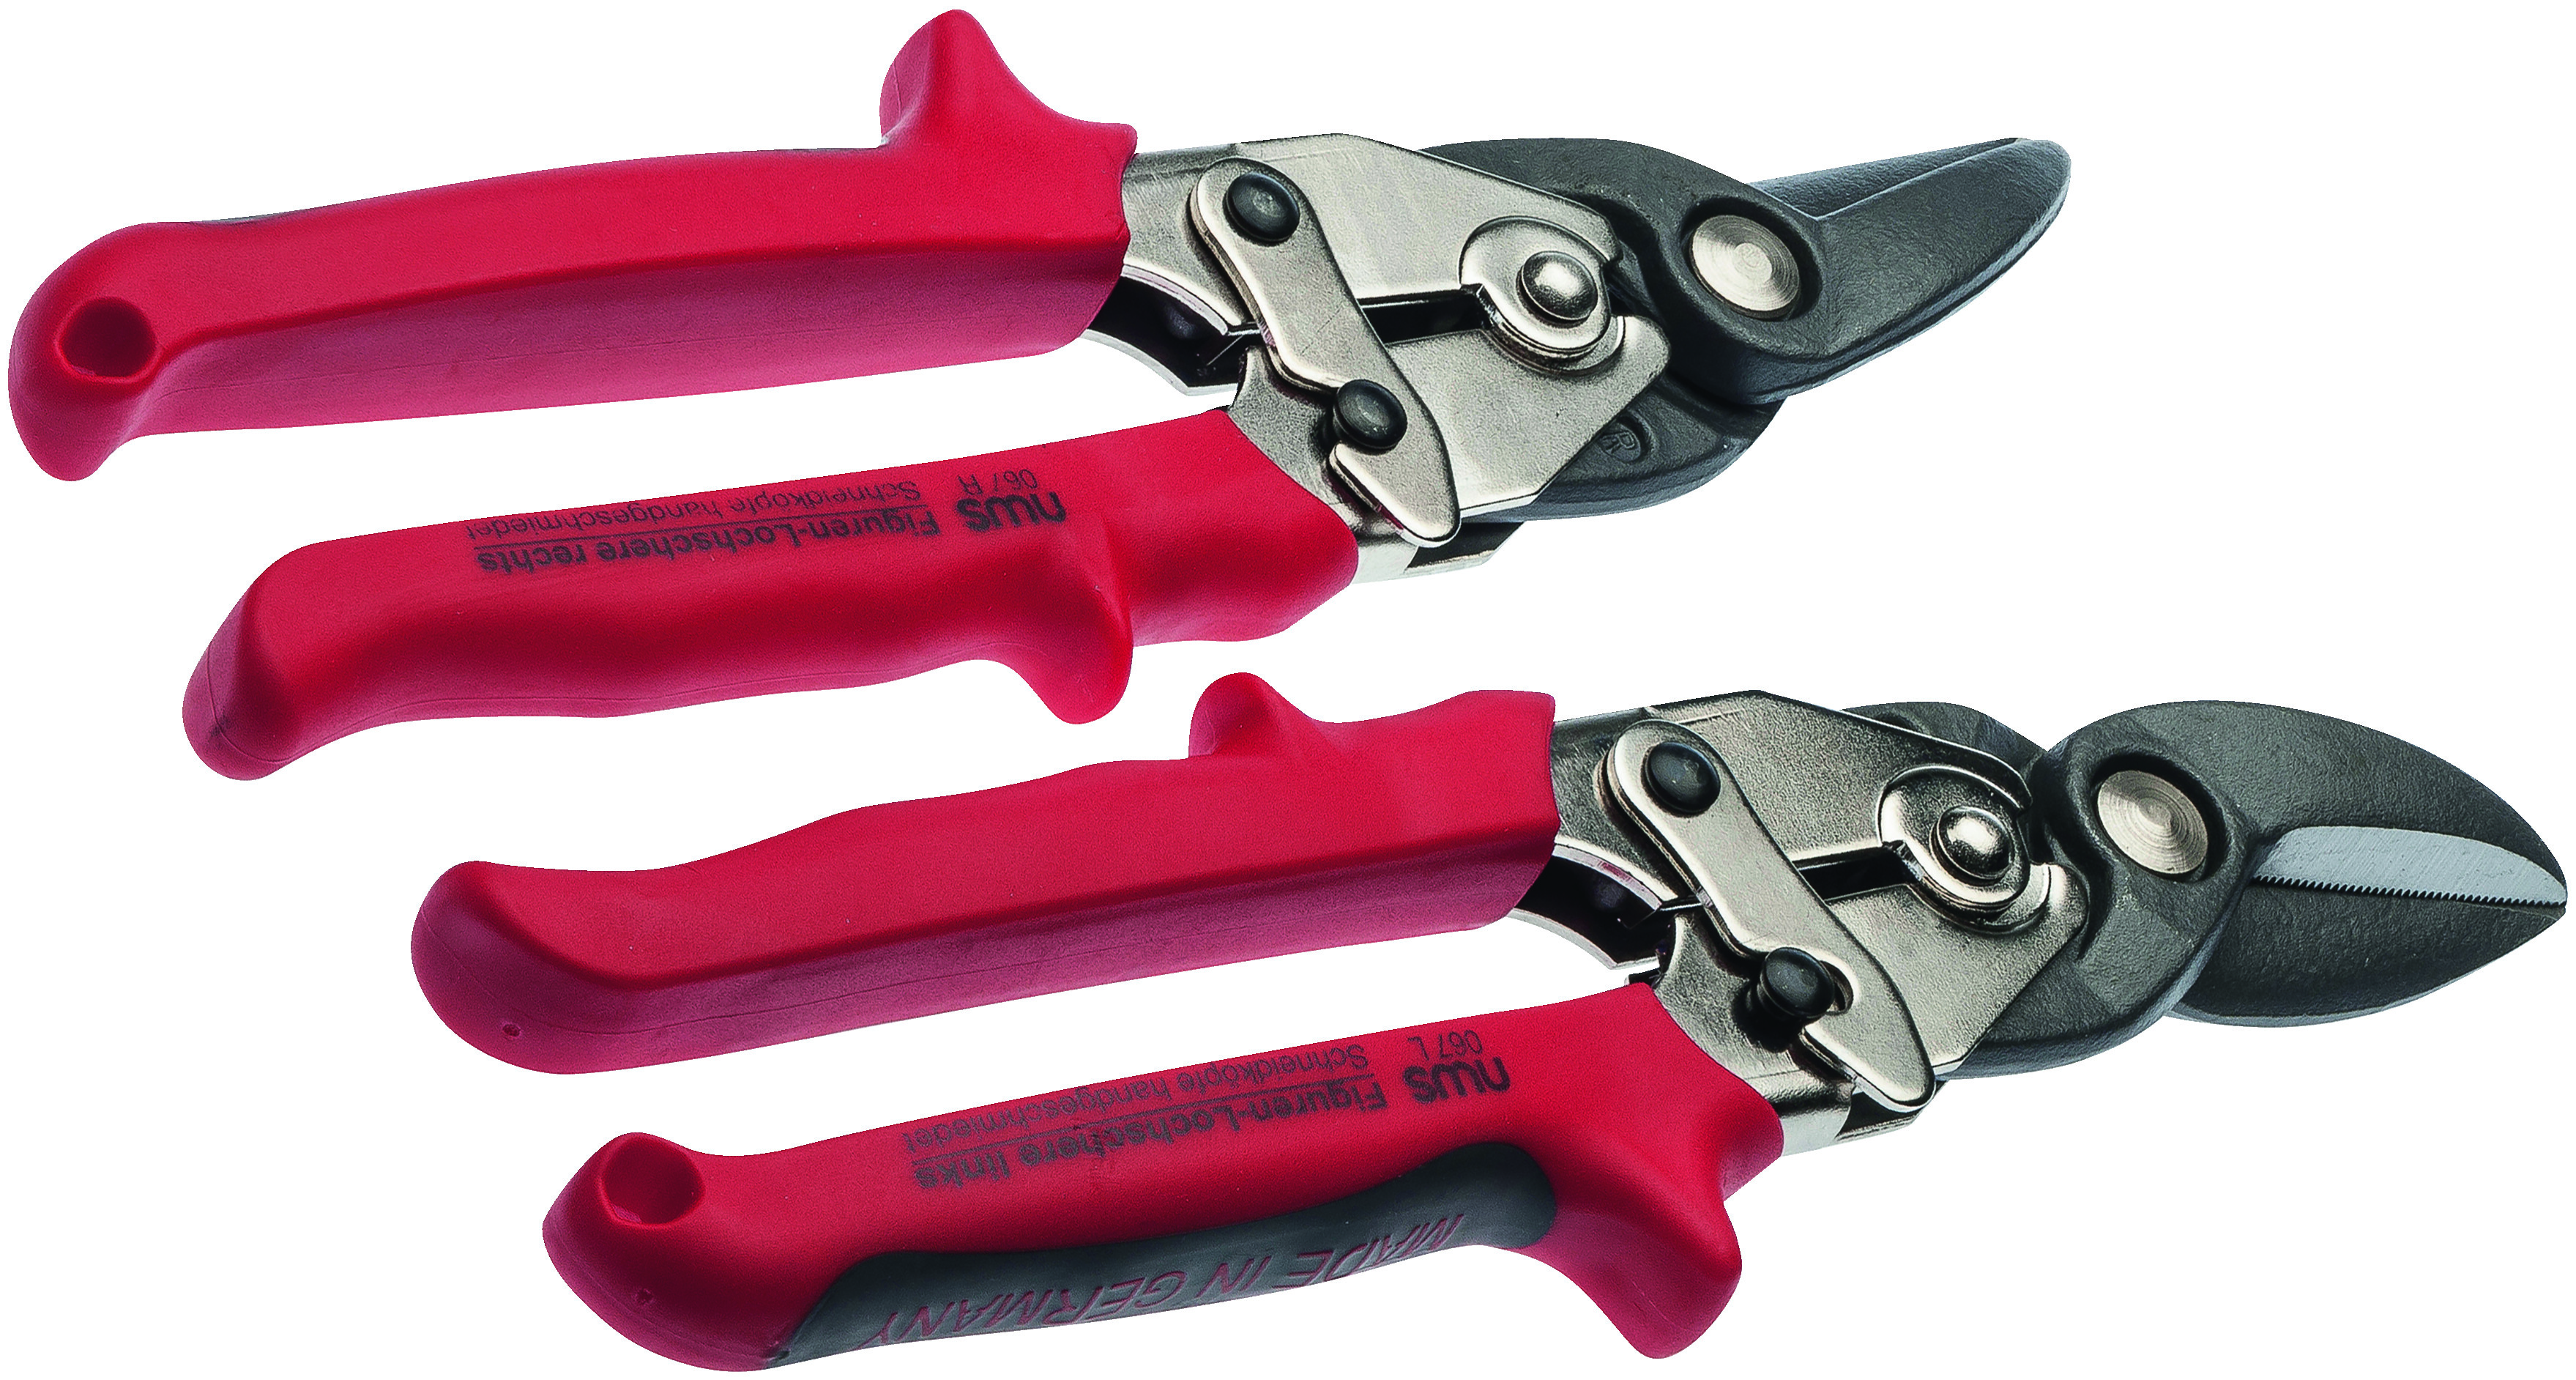 2 Pieces NWS 862-2 Pliers and Cutters Set 